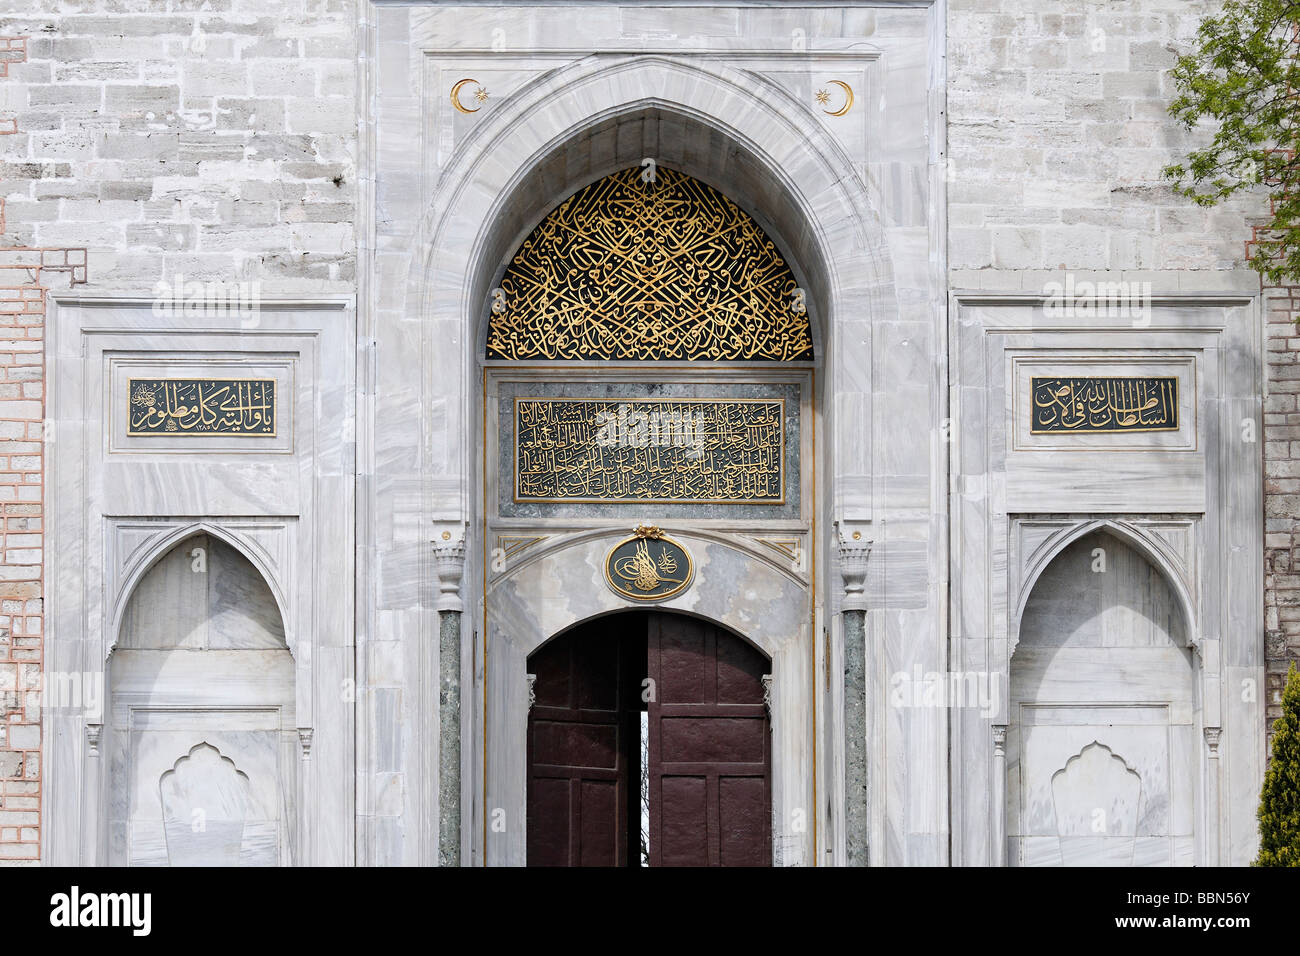 Porta Augusta, entrance to the first courtyard, marble portal with calligraphic decorations, Topkapi Palace, Sarayburnu, Istanb Stock Photo